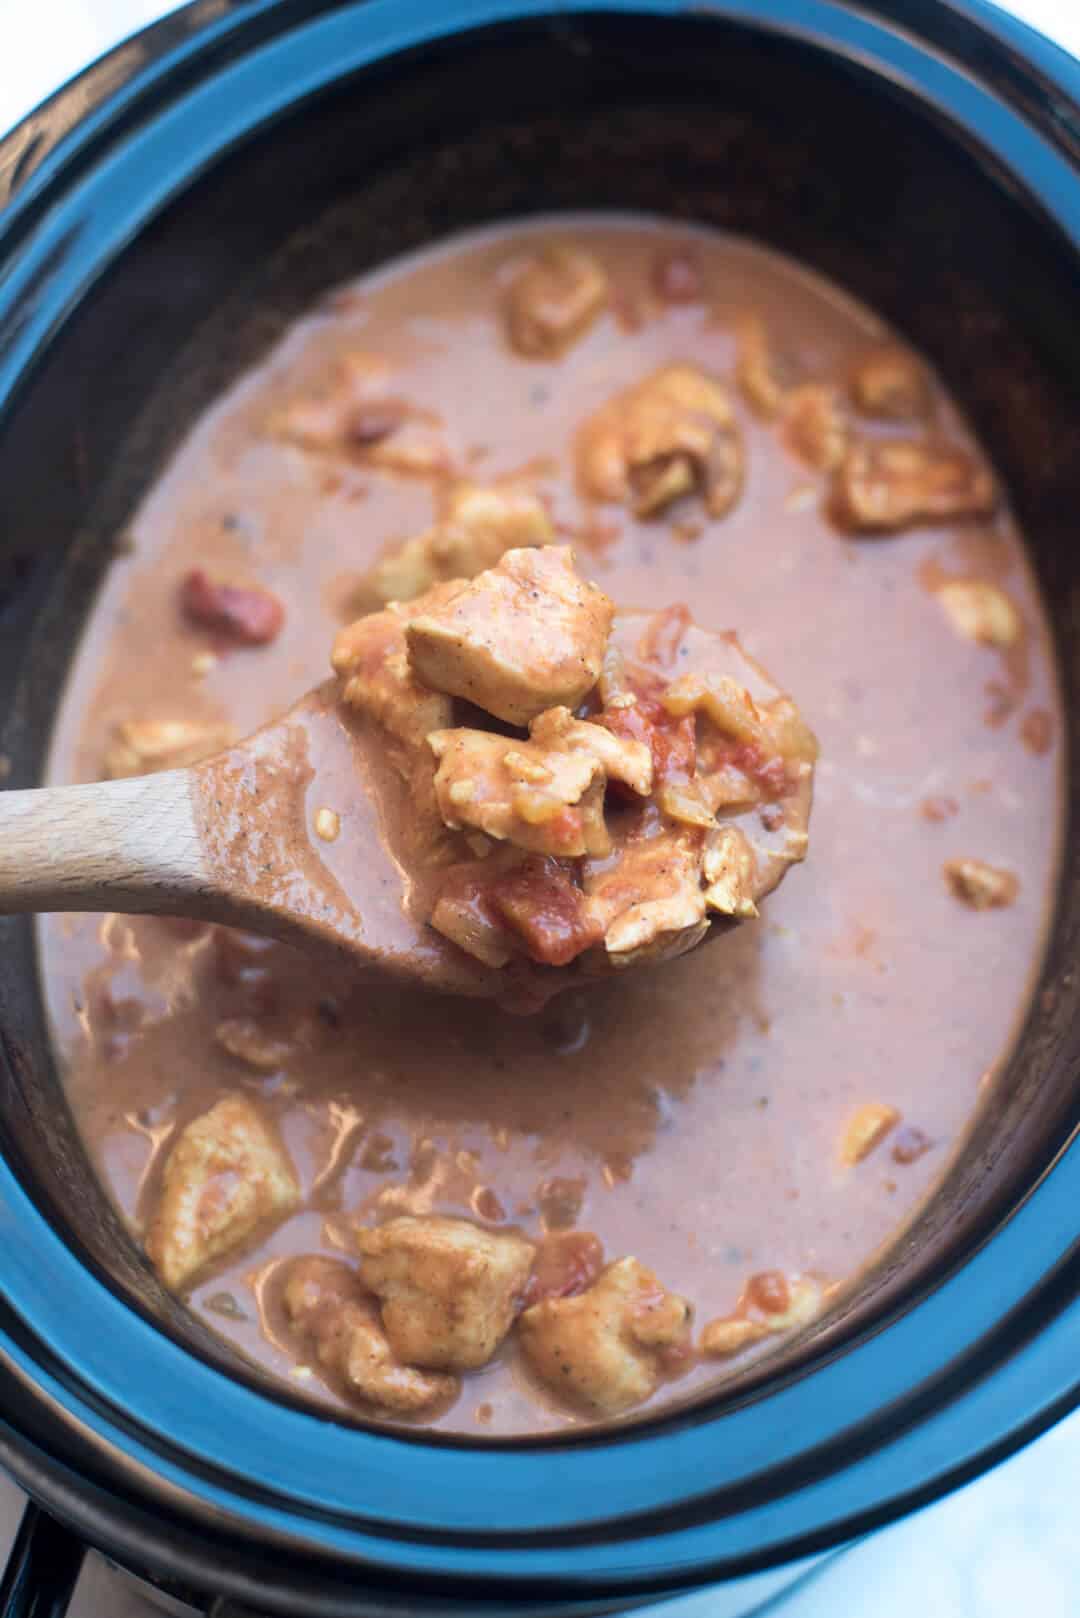 Tender chicken in a creamy, tomato-based sauce infused with fragrant Indian spices. Once you try this Slow Cooker Chicken Tikka Masala, you'll be hooked!